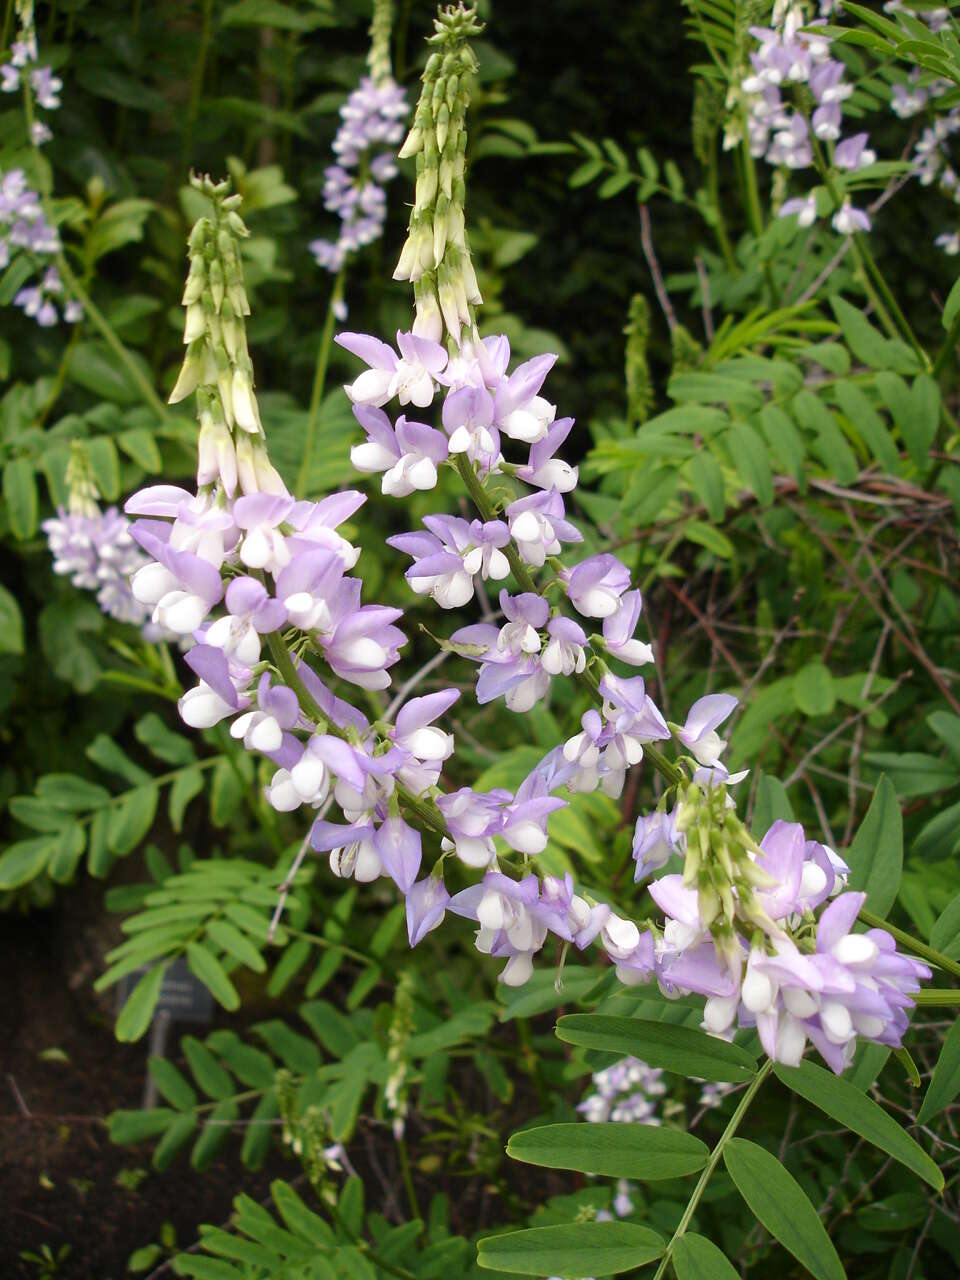 Image of Goat's rue